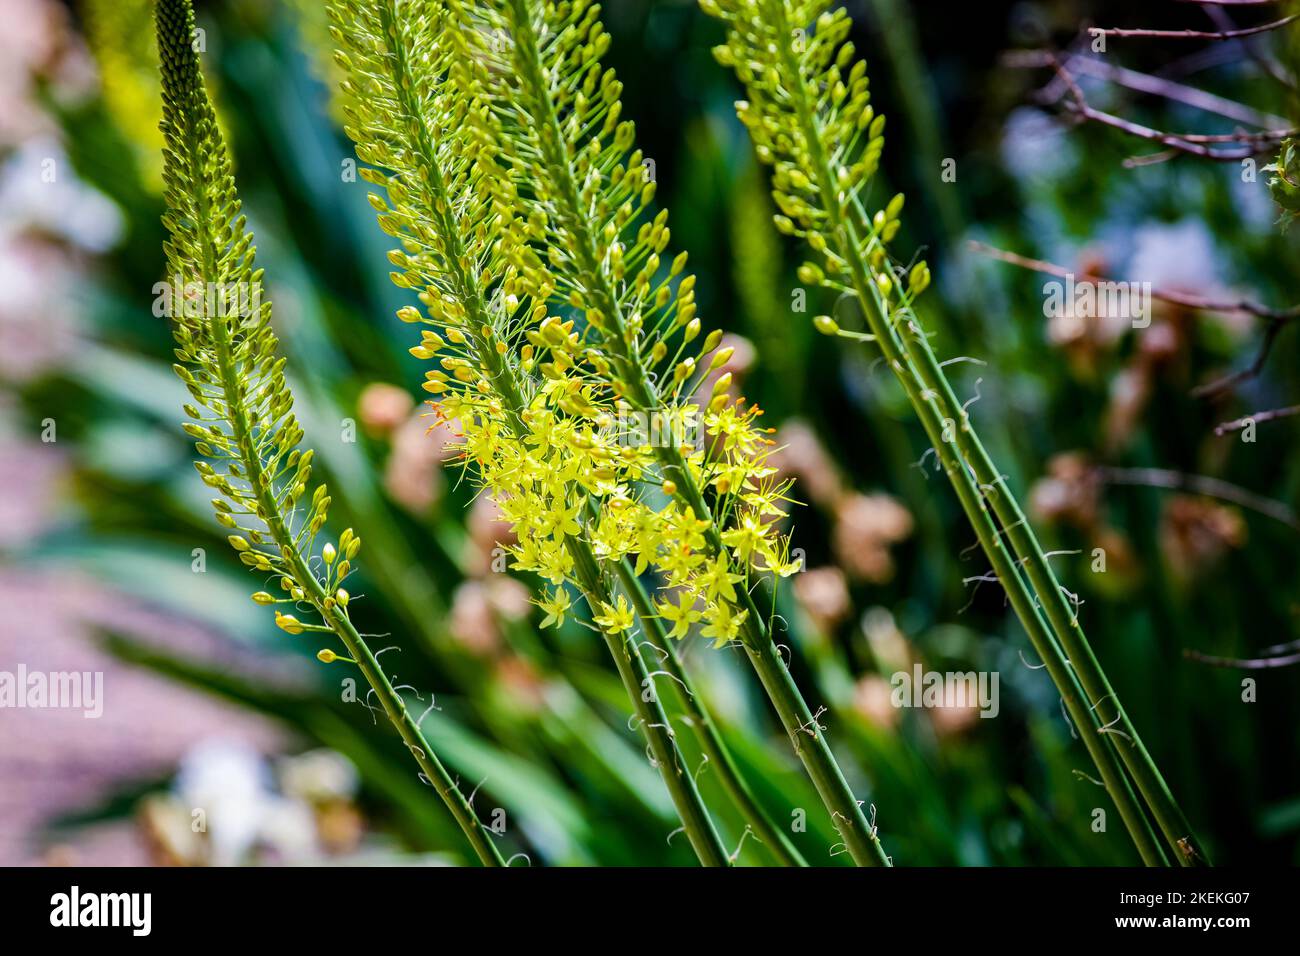 Closeup detail of Narrow leaved foxtail lily (Eremurus stenophyllus) Stock Photo